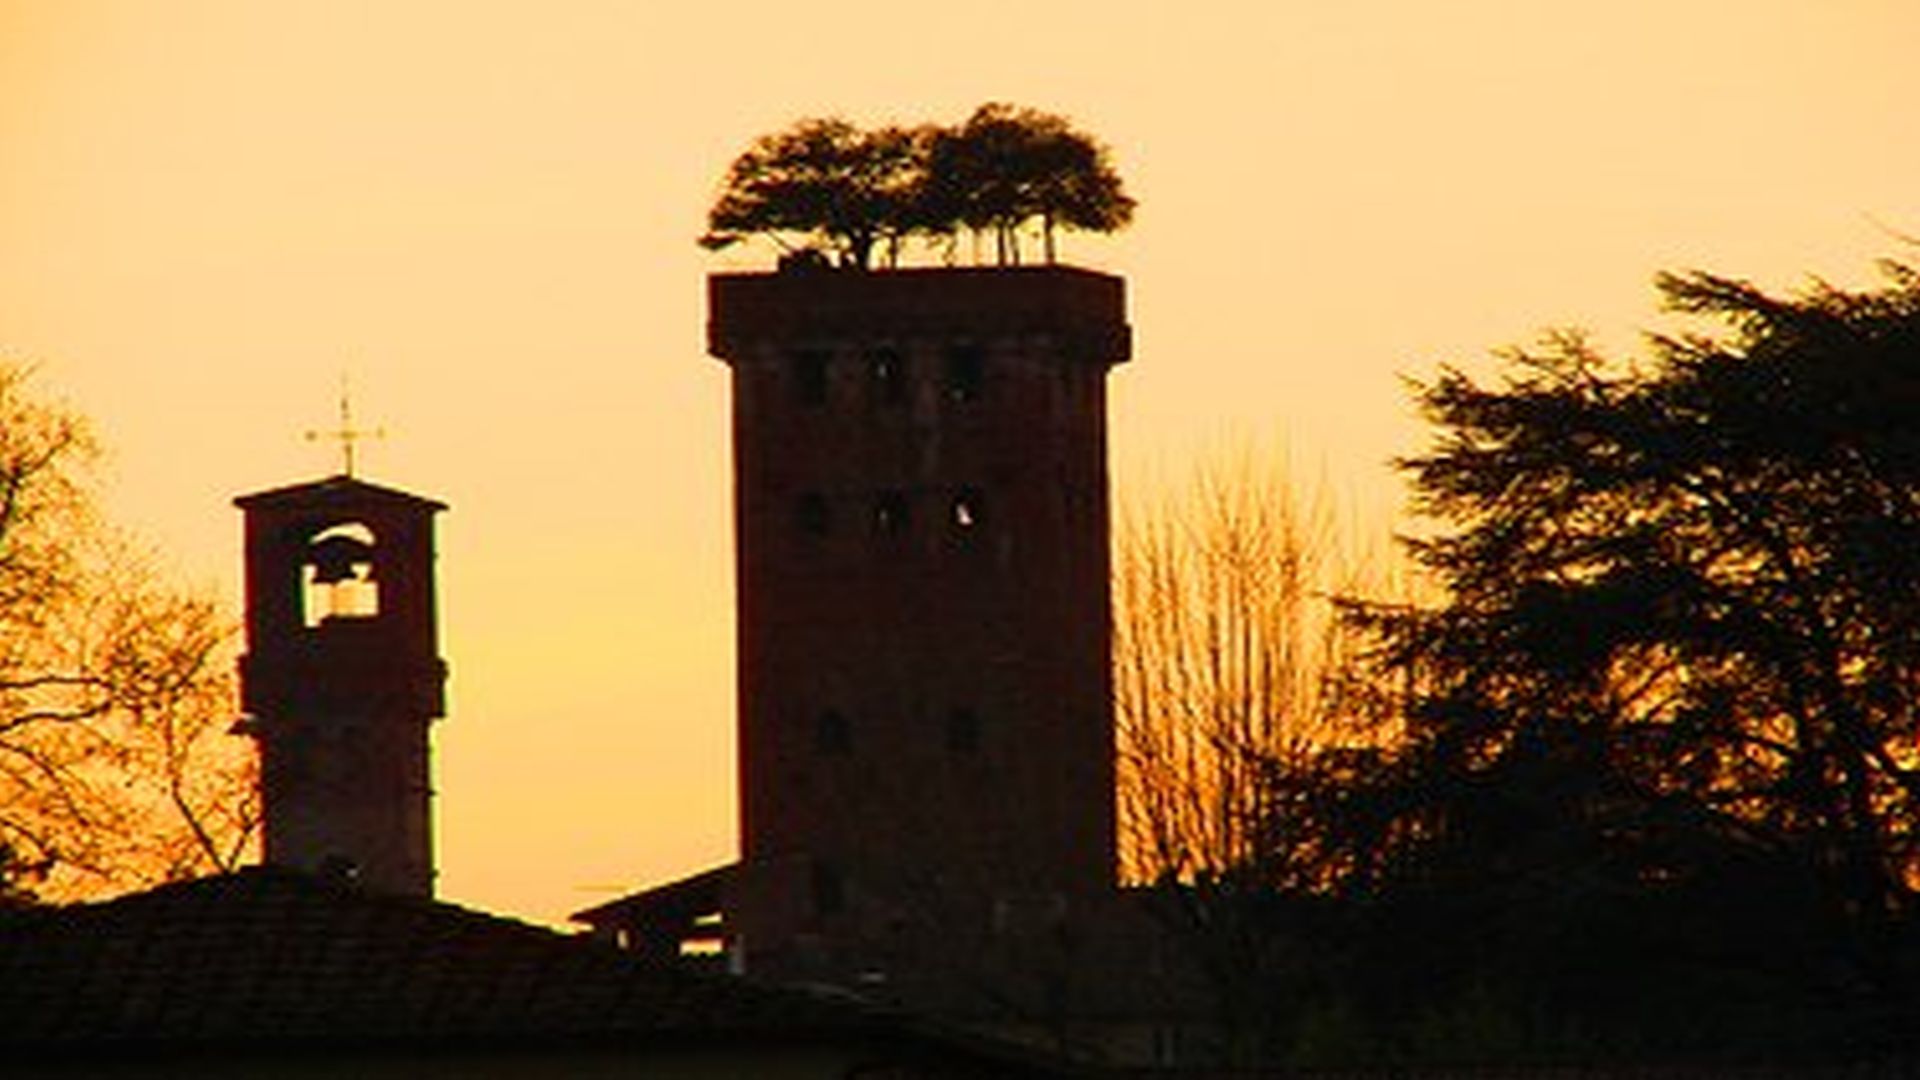 profiles of the guinigi tower and the hours in lucca